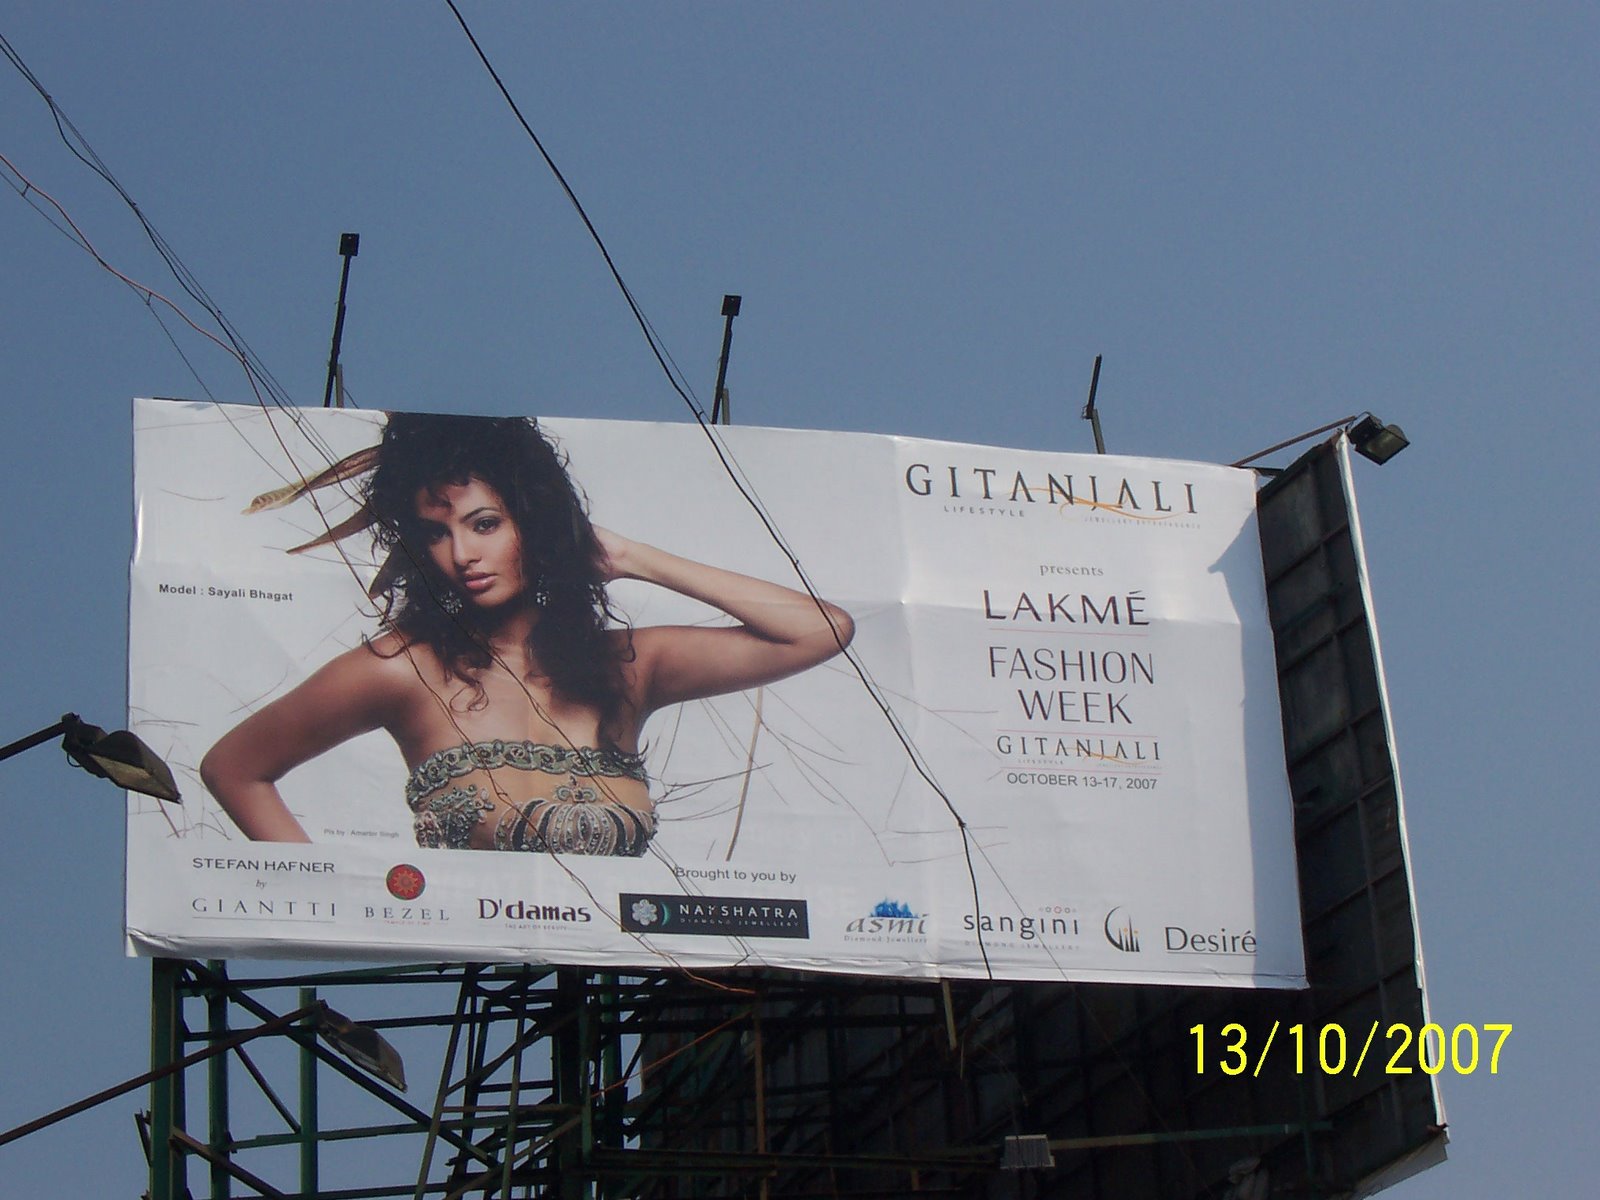 [Sayali+Bhagat+wearing+A+D+Singhâ€™s+outfit+in+a+print+ad.jpg]